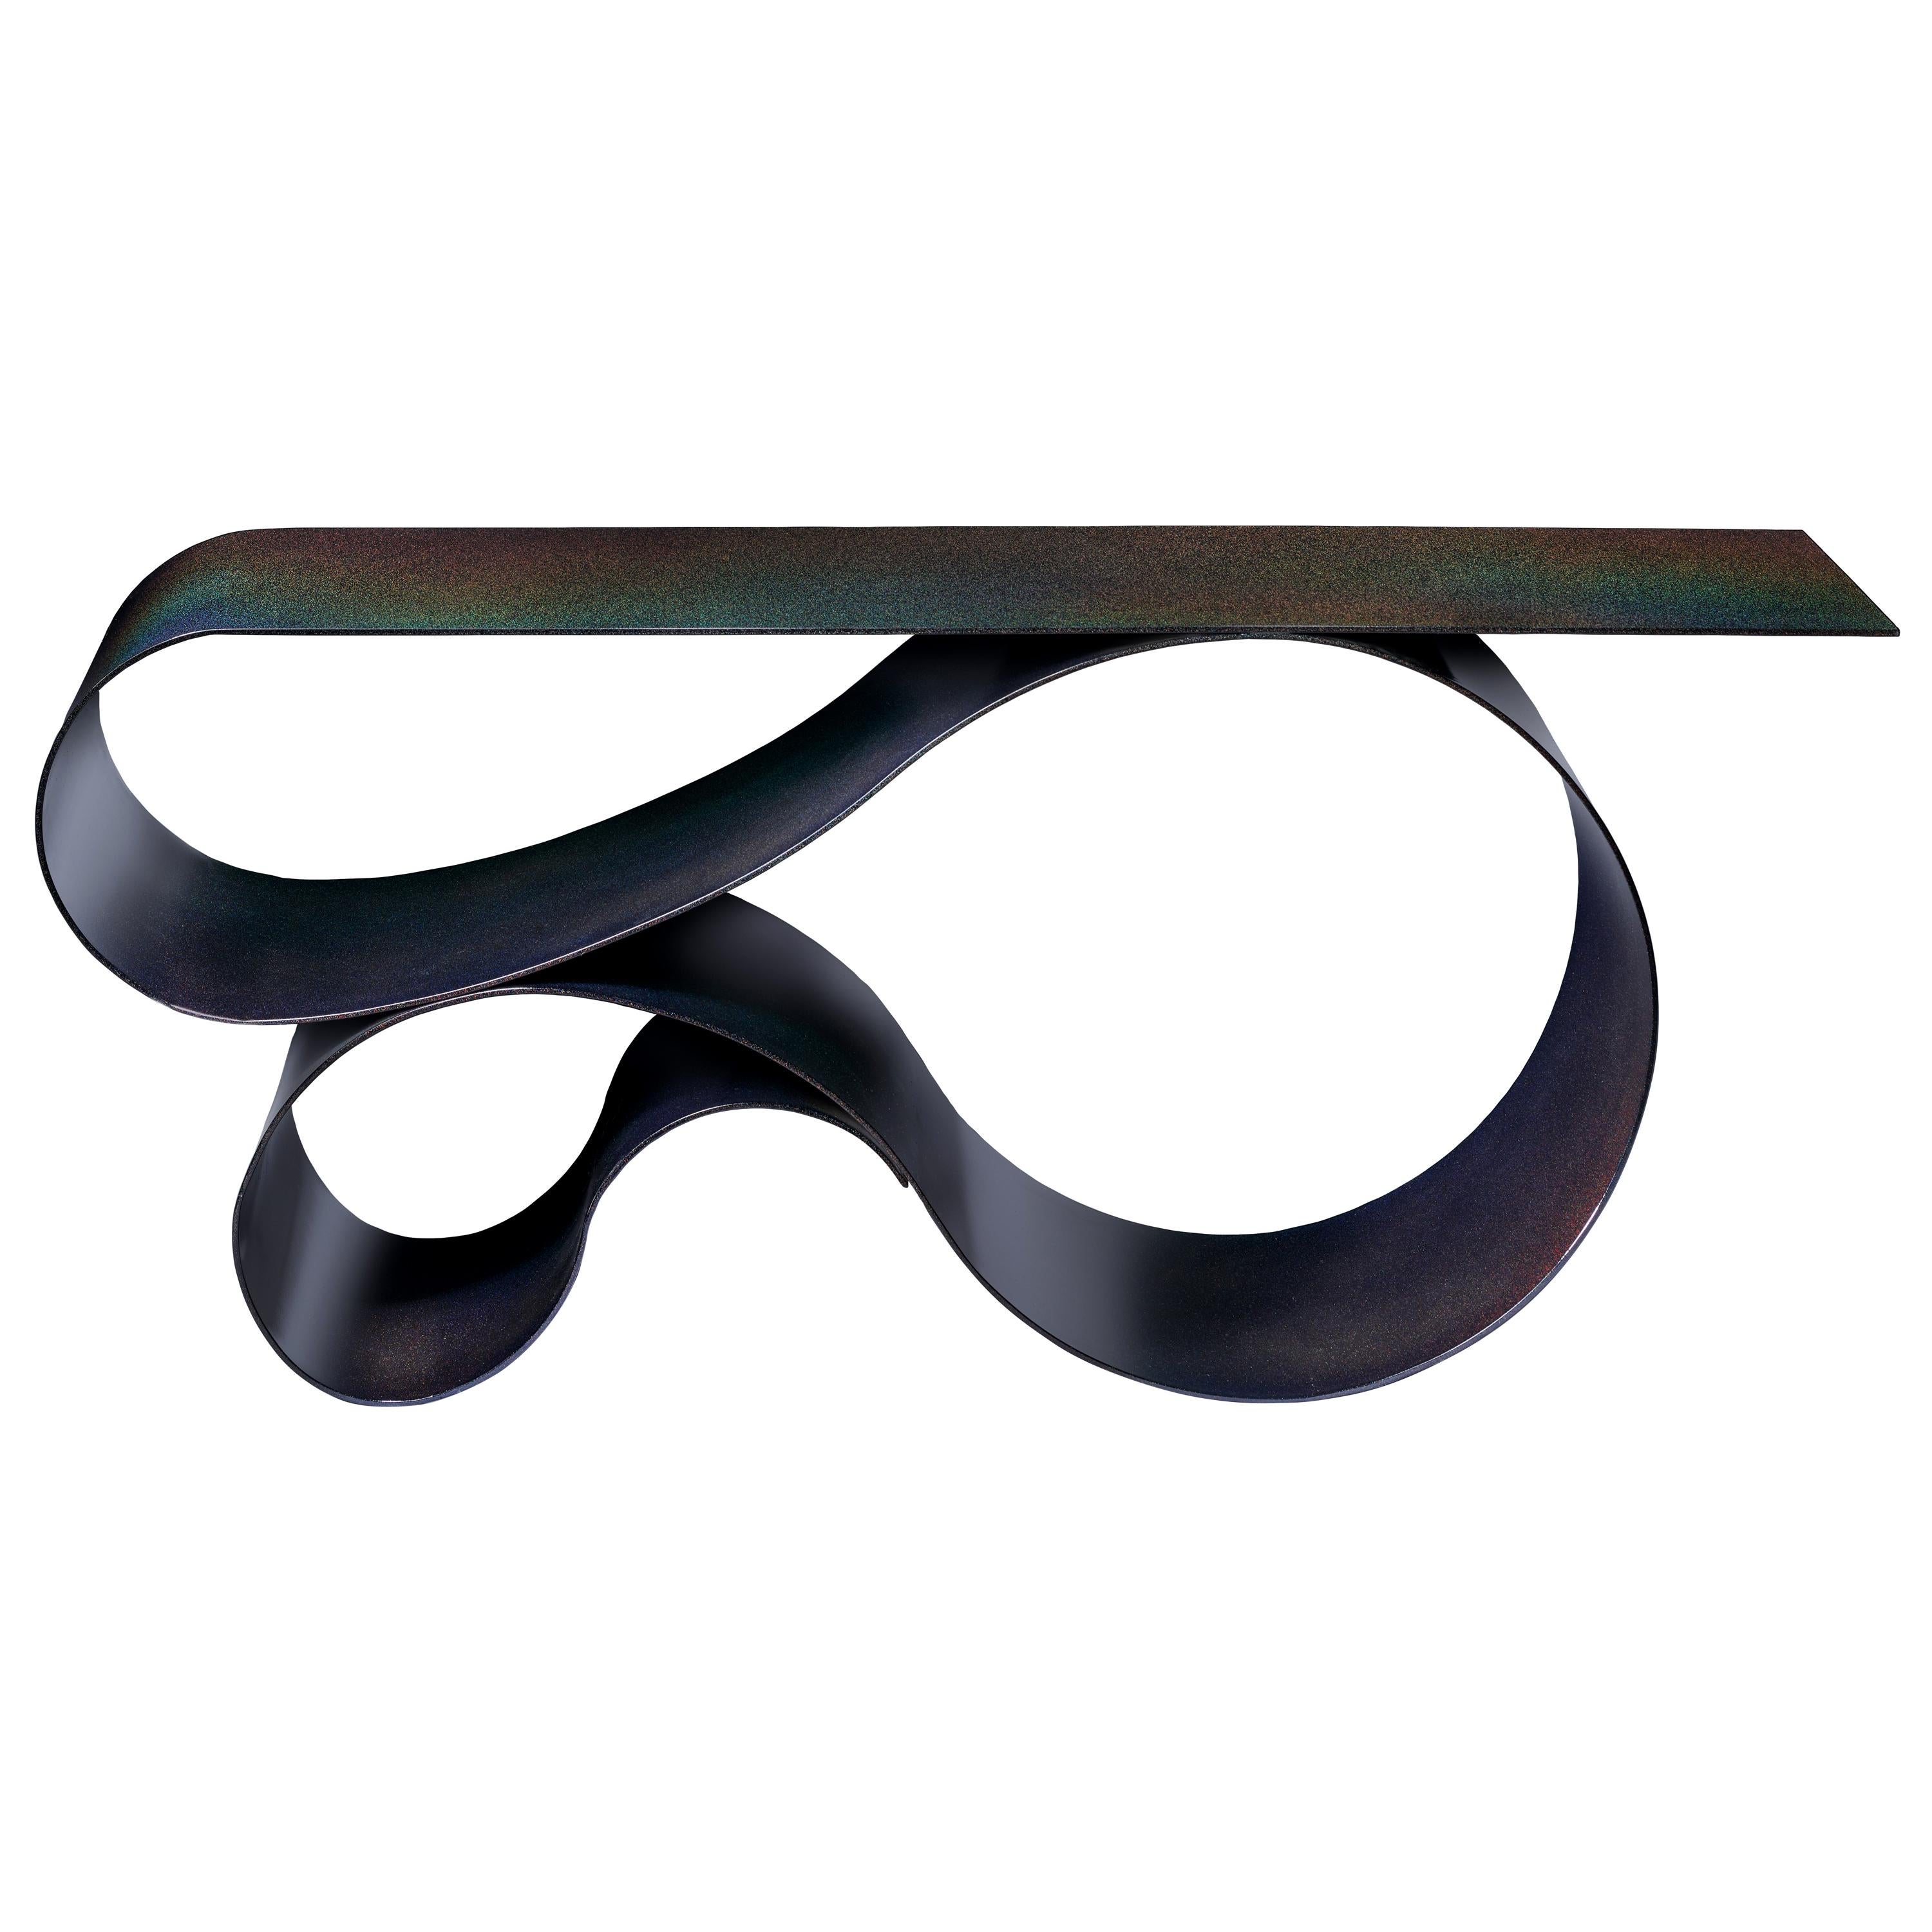 Whorl Console, in Black Iridescent Powder Coated Aluminum by Neal Aronowitz For Sale